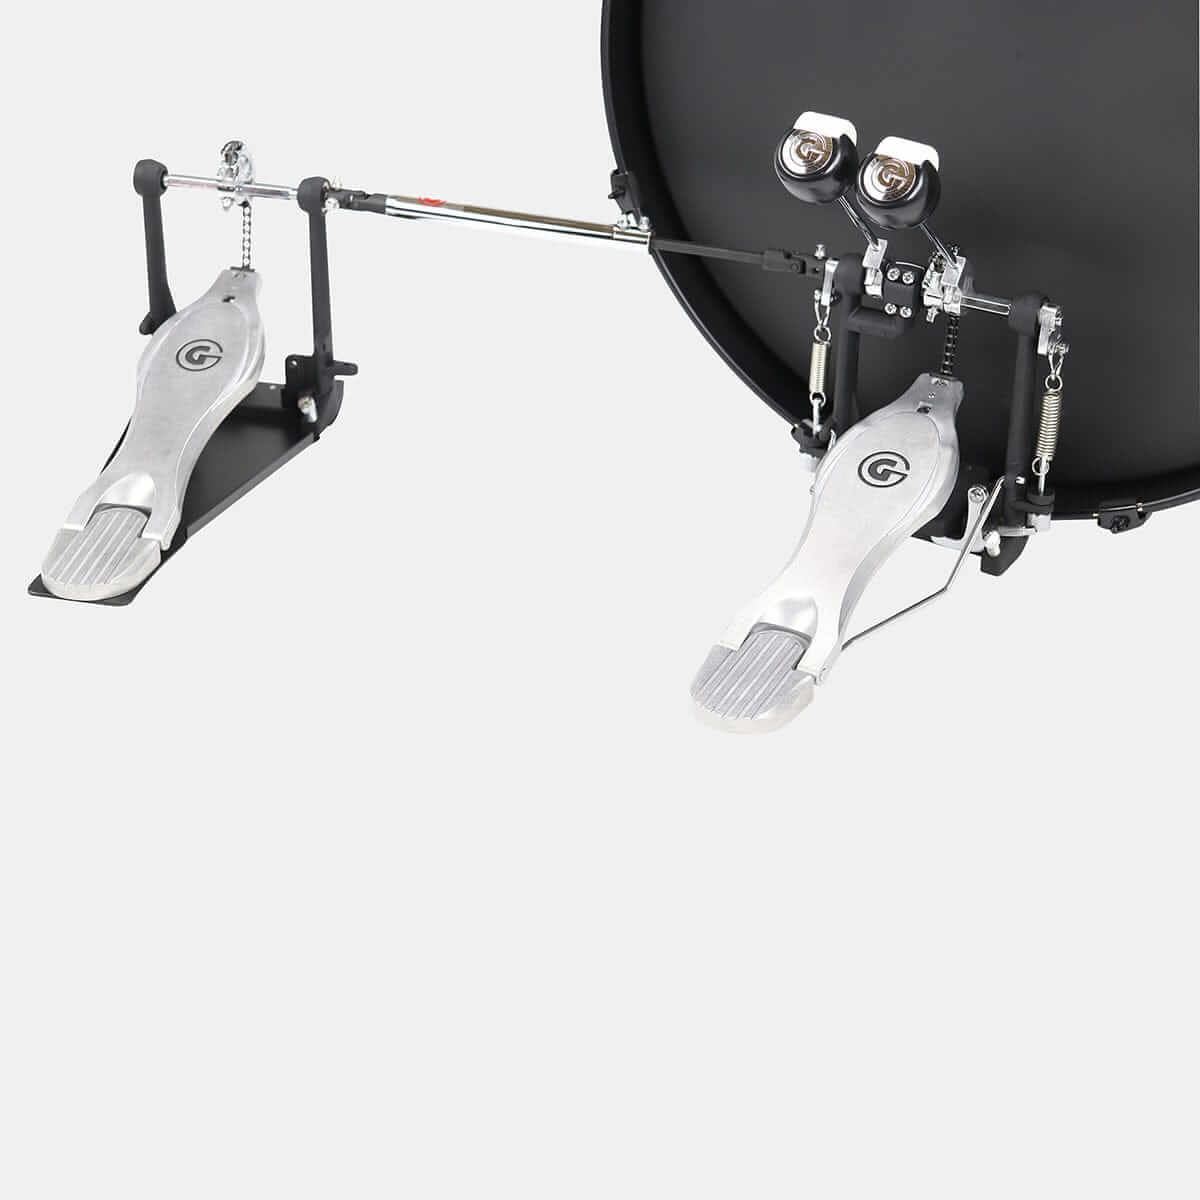  Gibraltar 5711DB Single Chain Drive Double Bass Pedal double bass drum pedal